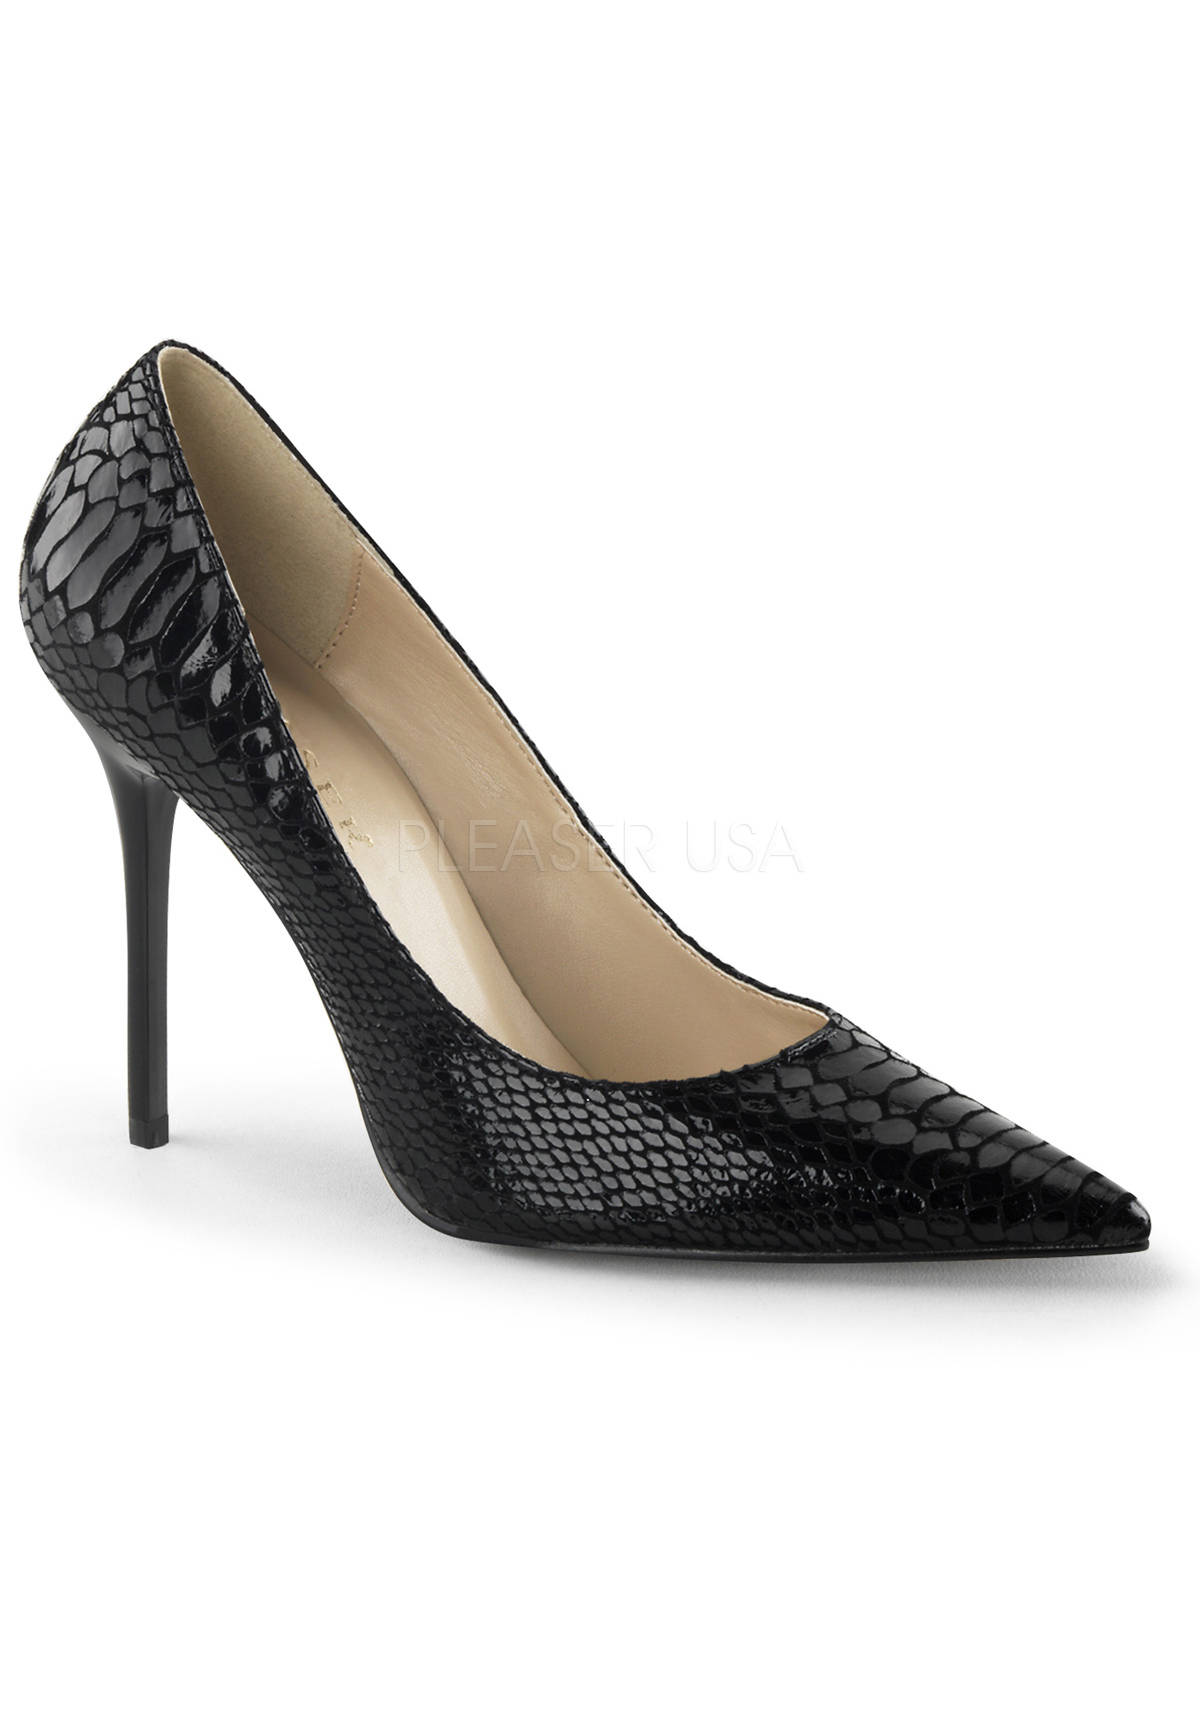 Pleaser 4 Inch Pointed-Toe Pump - Blk Snake-Print Leather